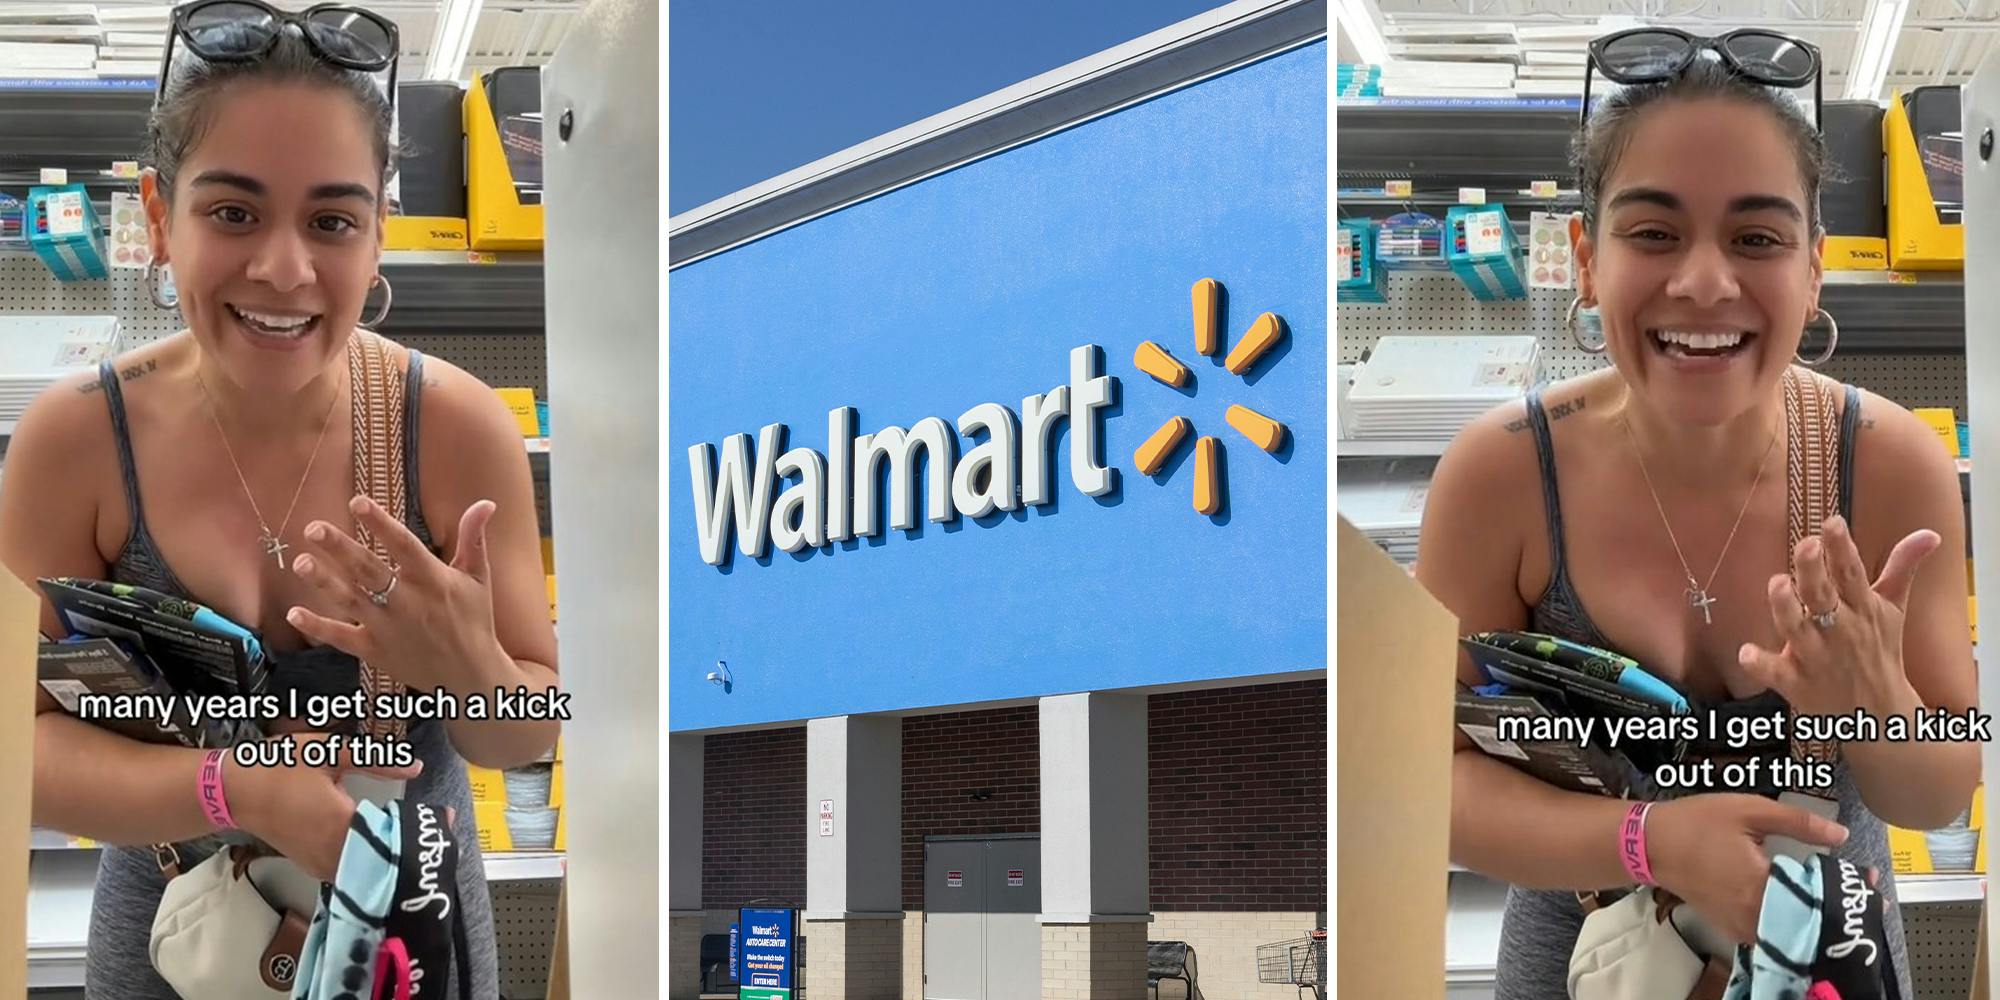 ‘Who takes their time to steal clearance items?’: Walmart customer slams secret shoppers for following the ‘wrong people’ around store